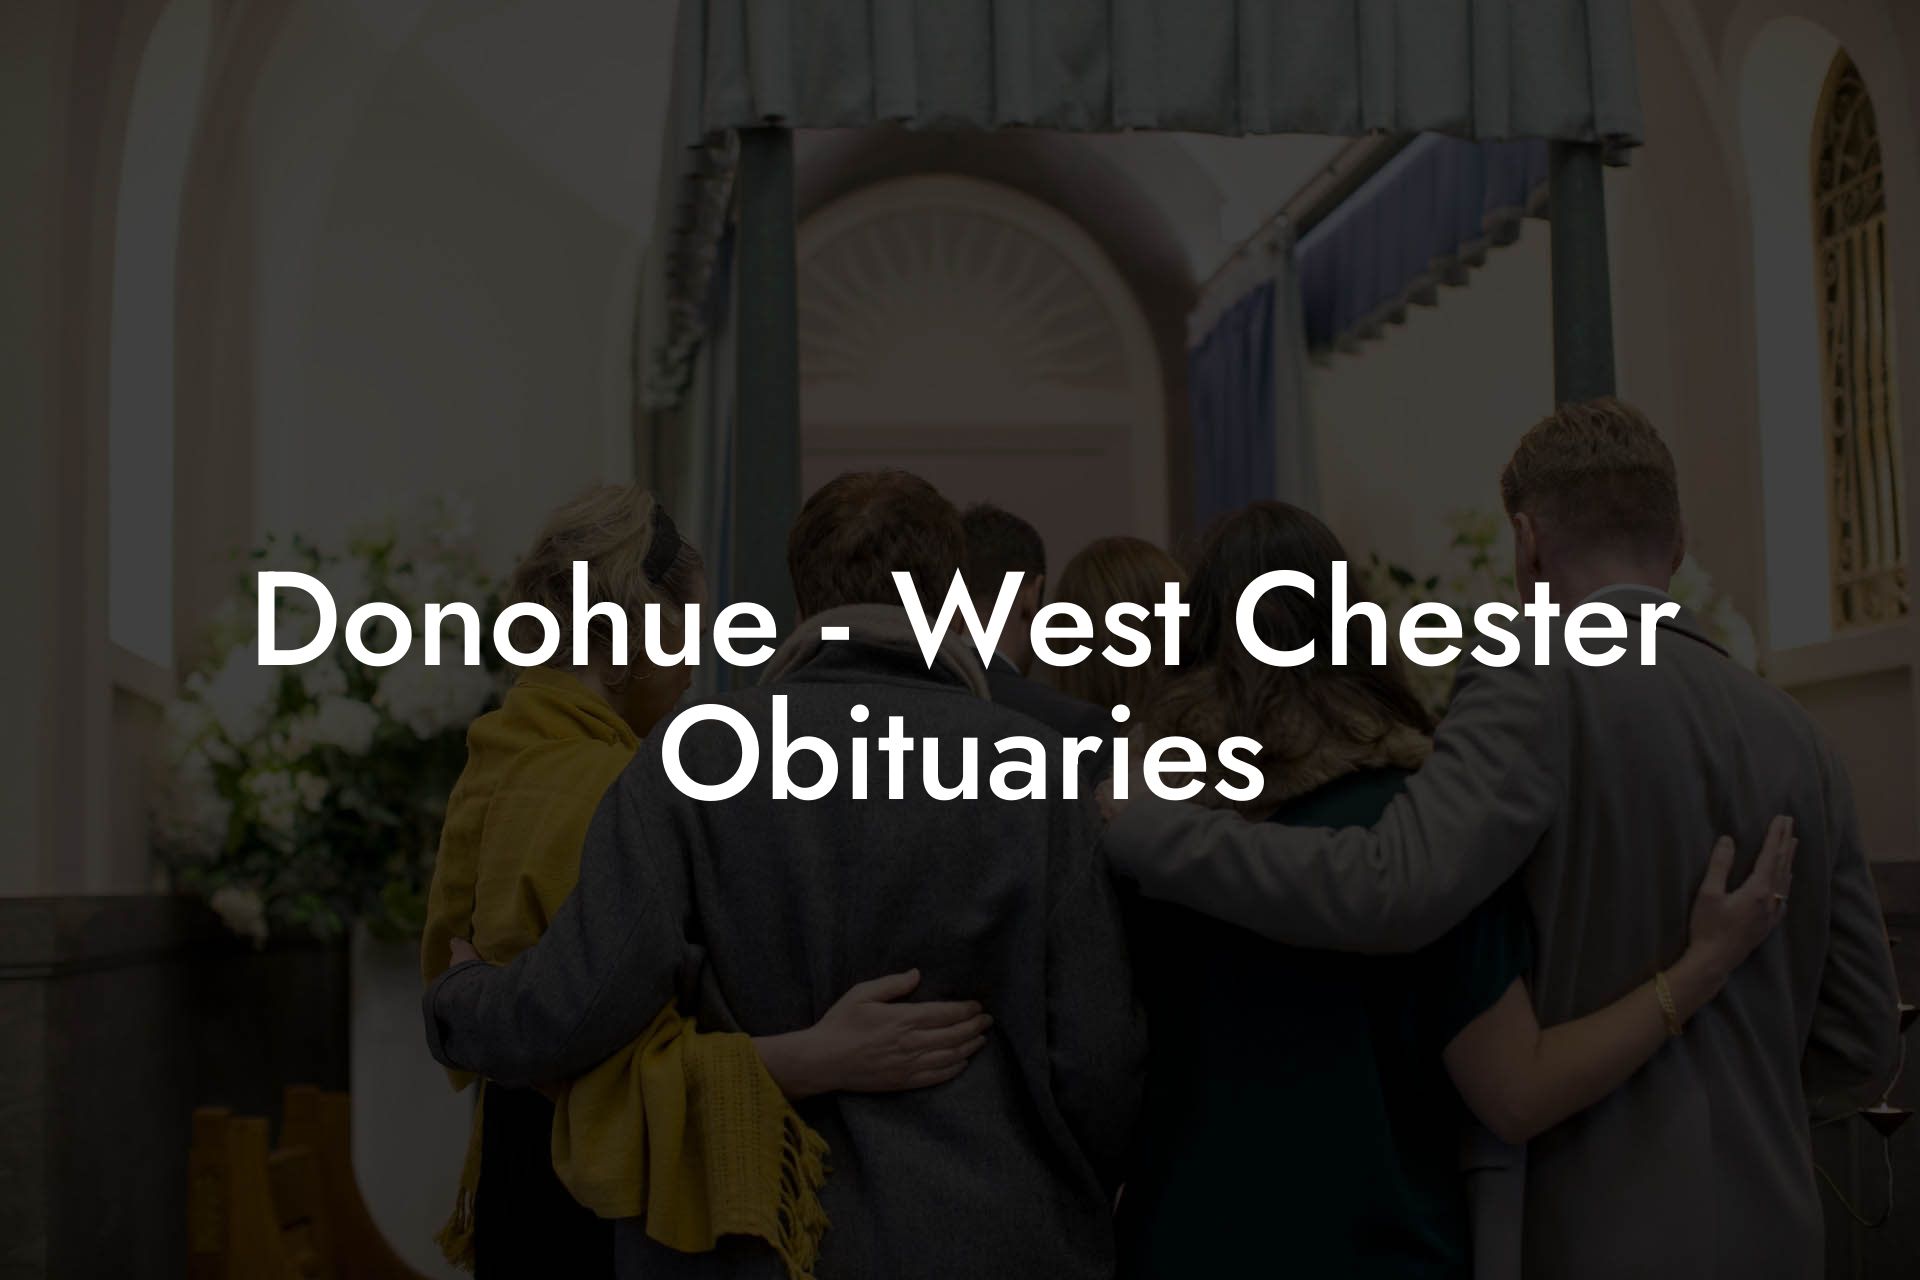 Donohue - West Chester Obituaries